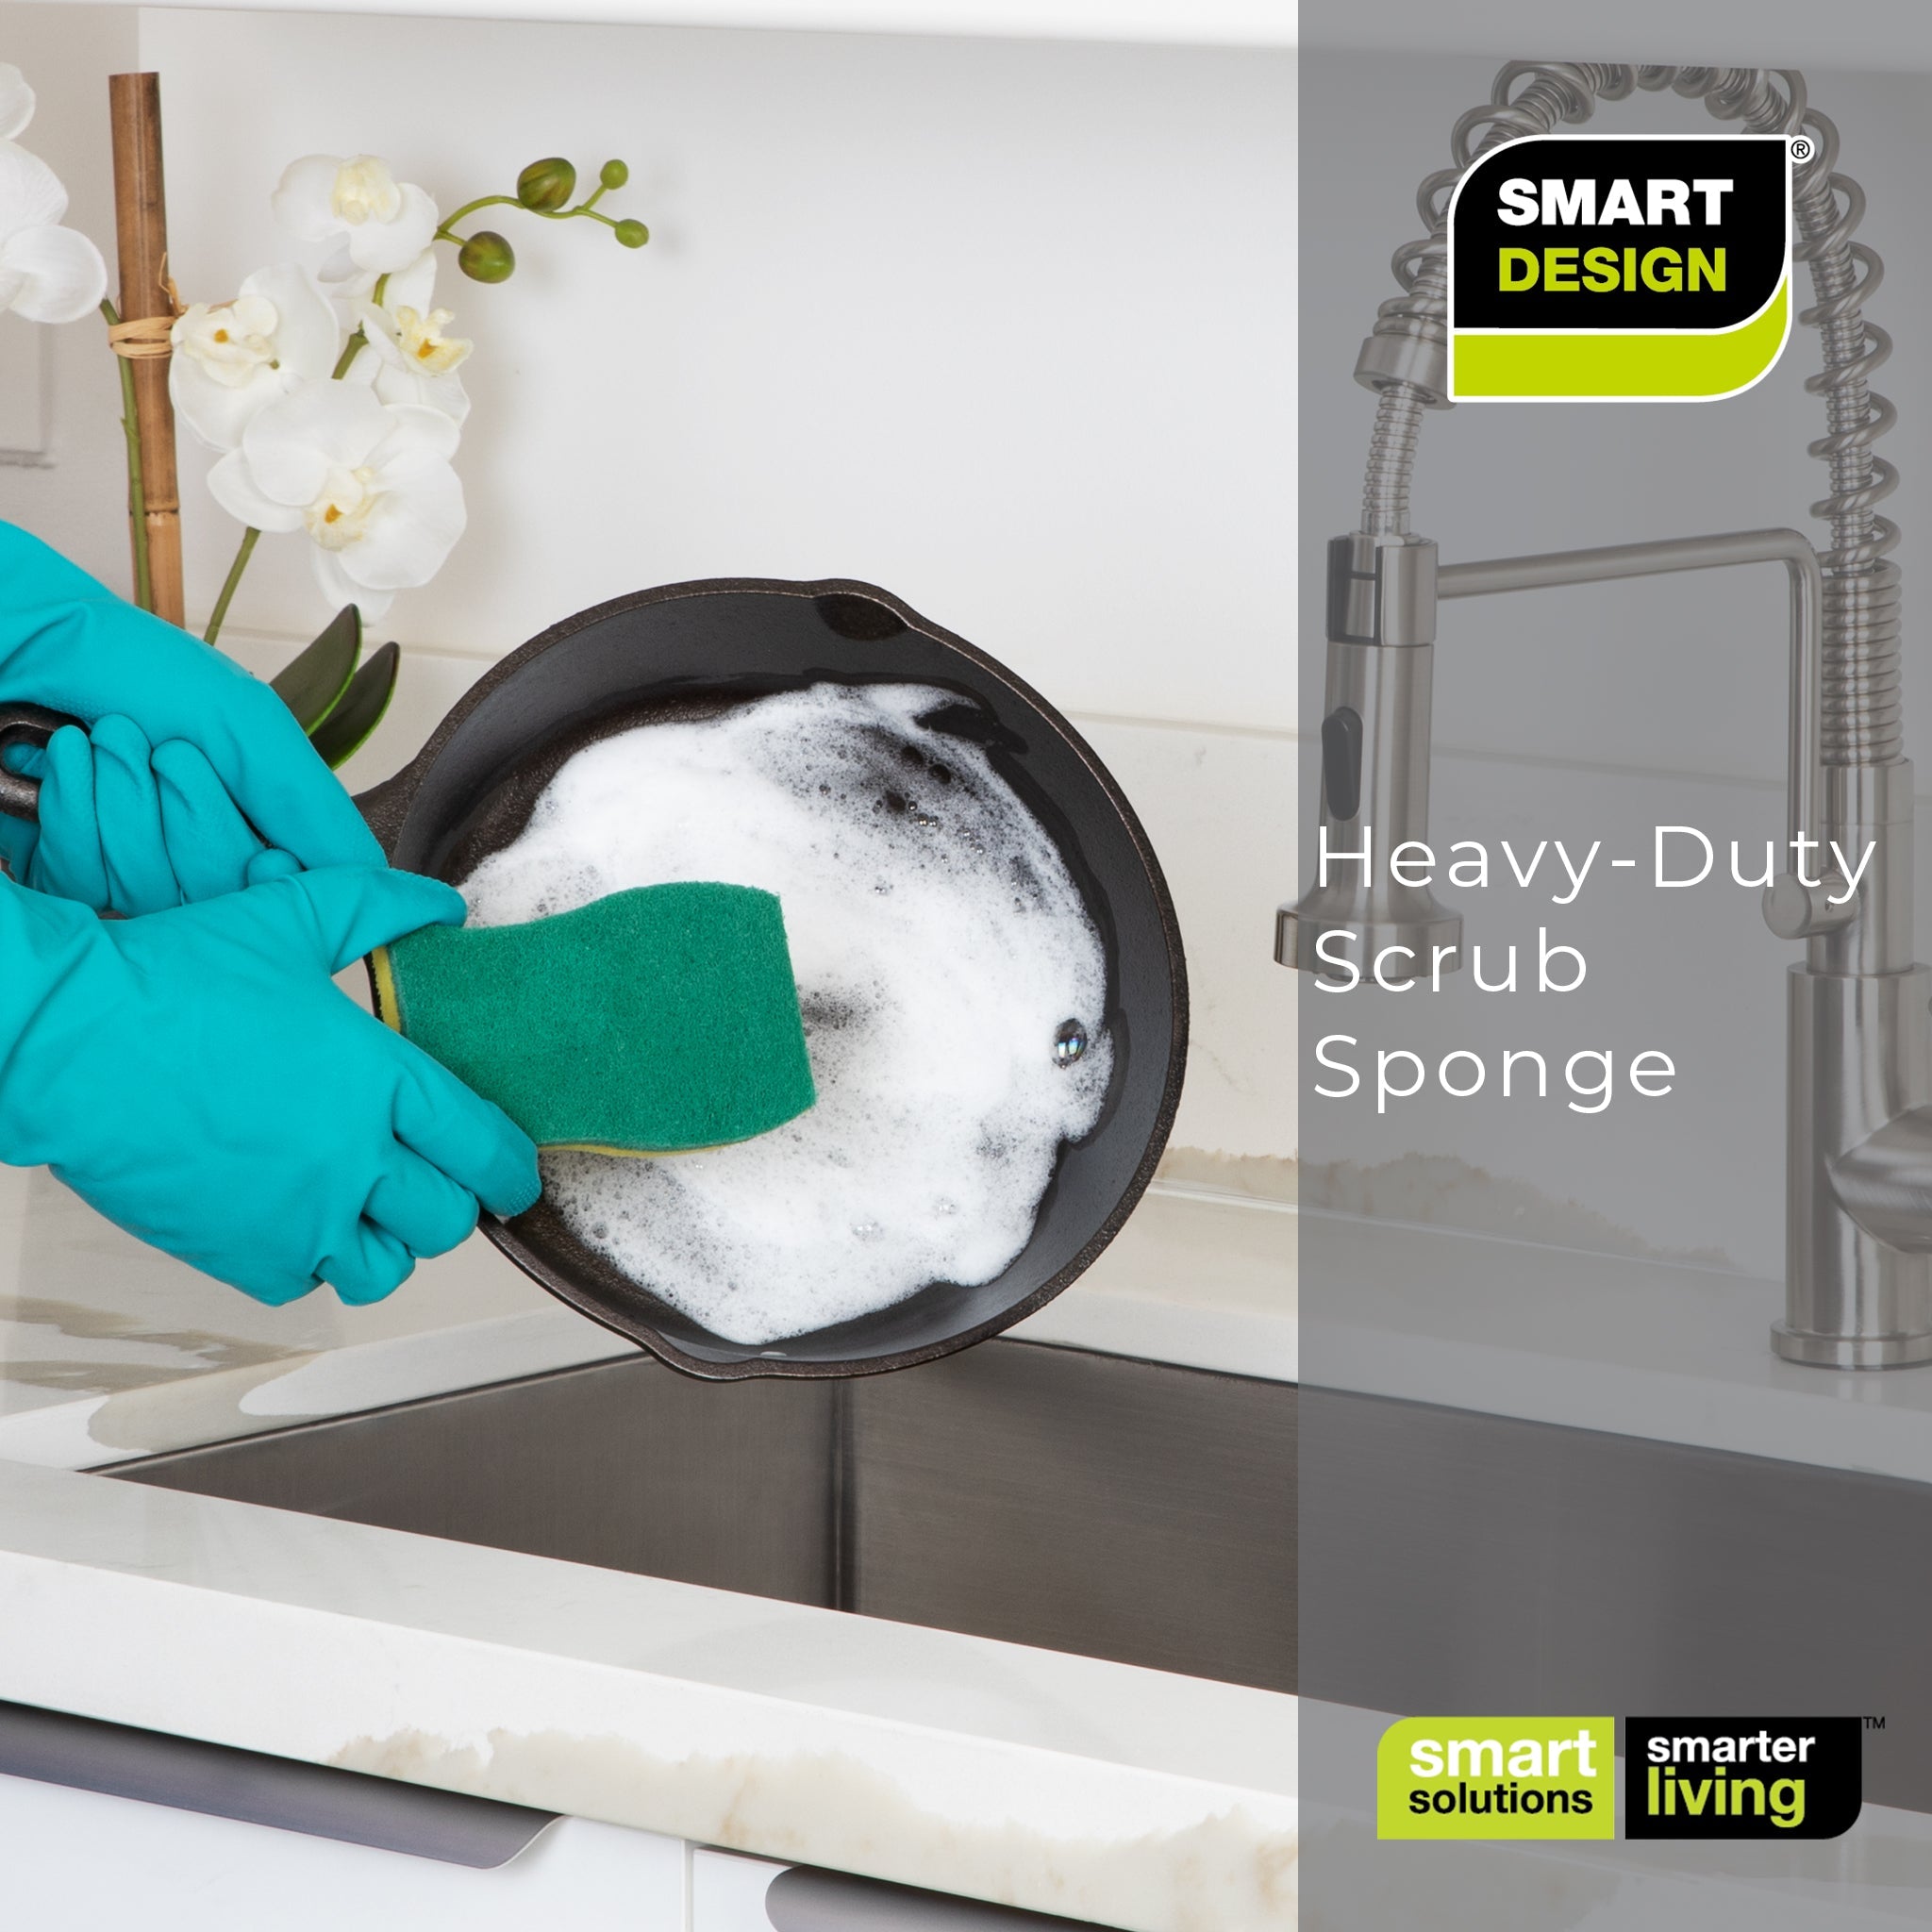 Heavy Duty Scrub Sponge - Ultra Absorbent - Ergonomic Shape - Cleaning, Dishes, & Hard Stains - Green by Smart Design 8